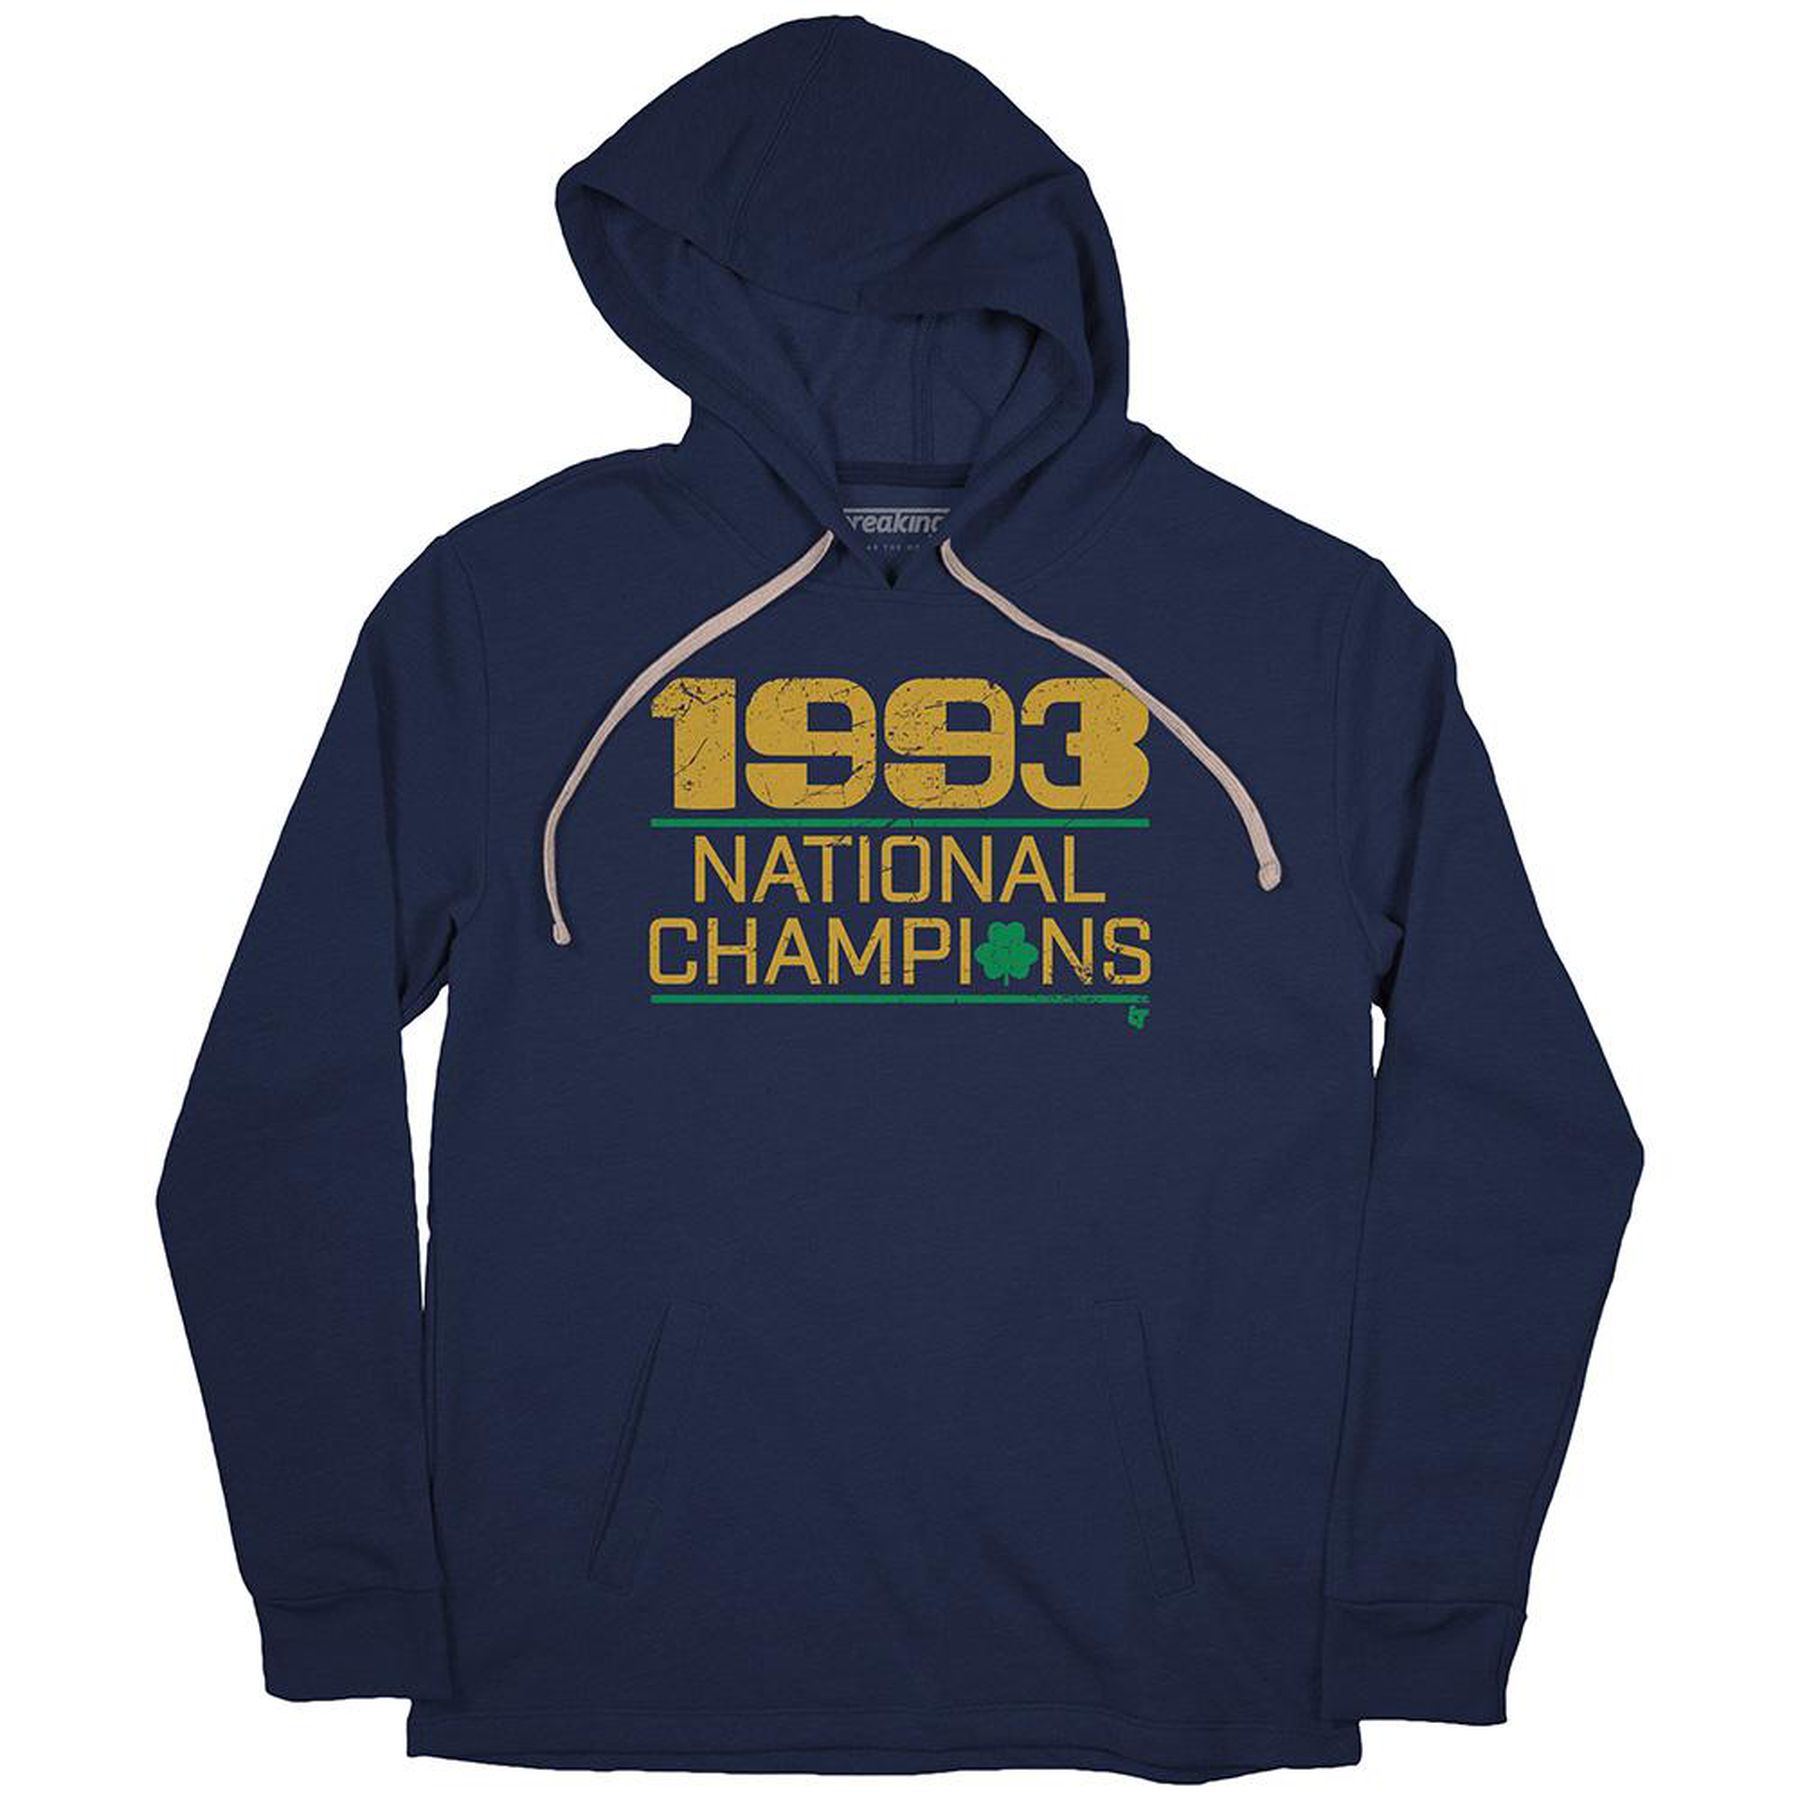 BLACK FRIDAY SALE: Notre Dame 1993 National Champions 